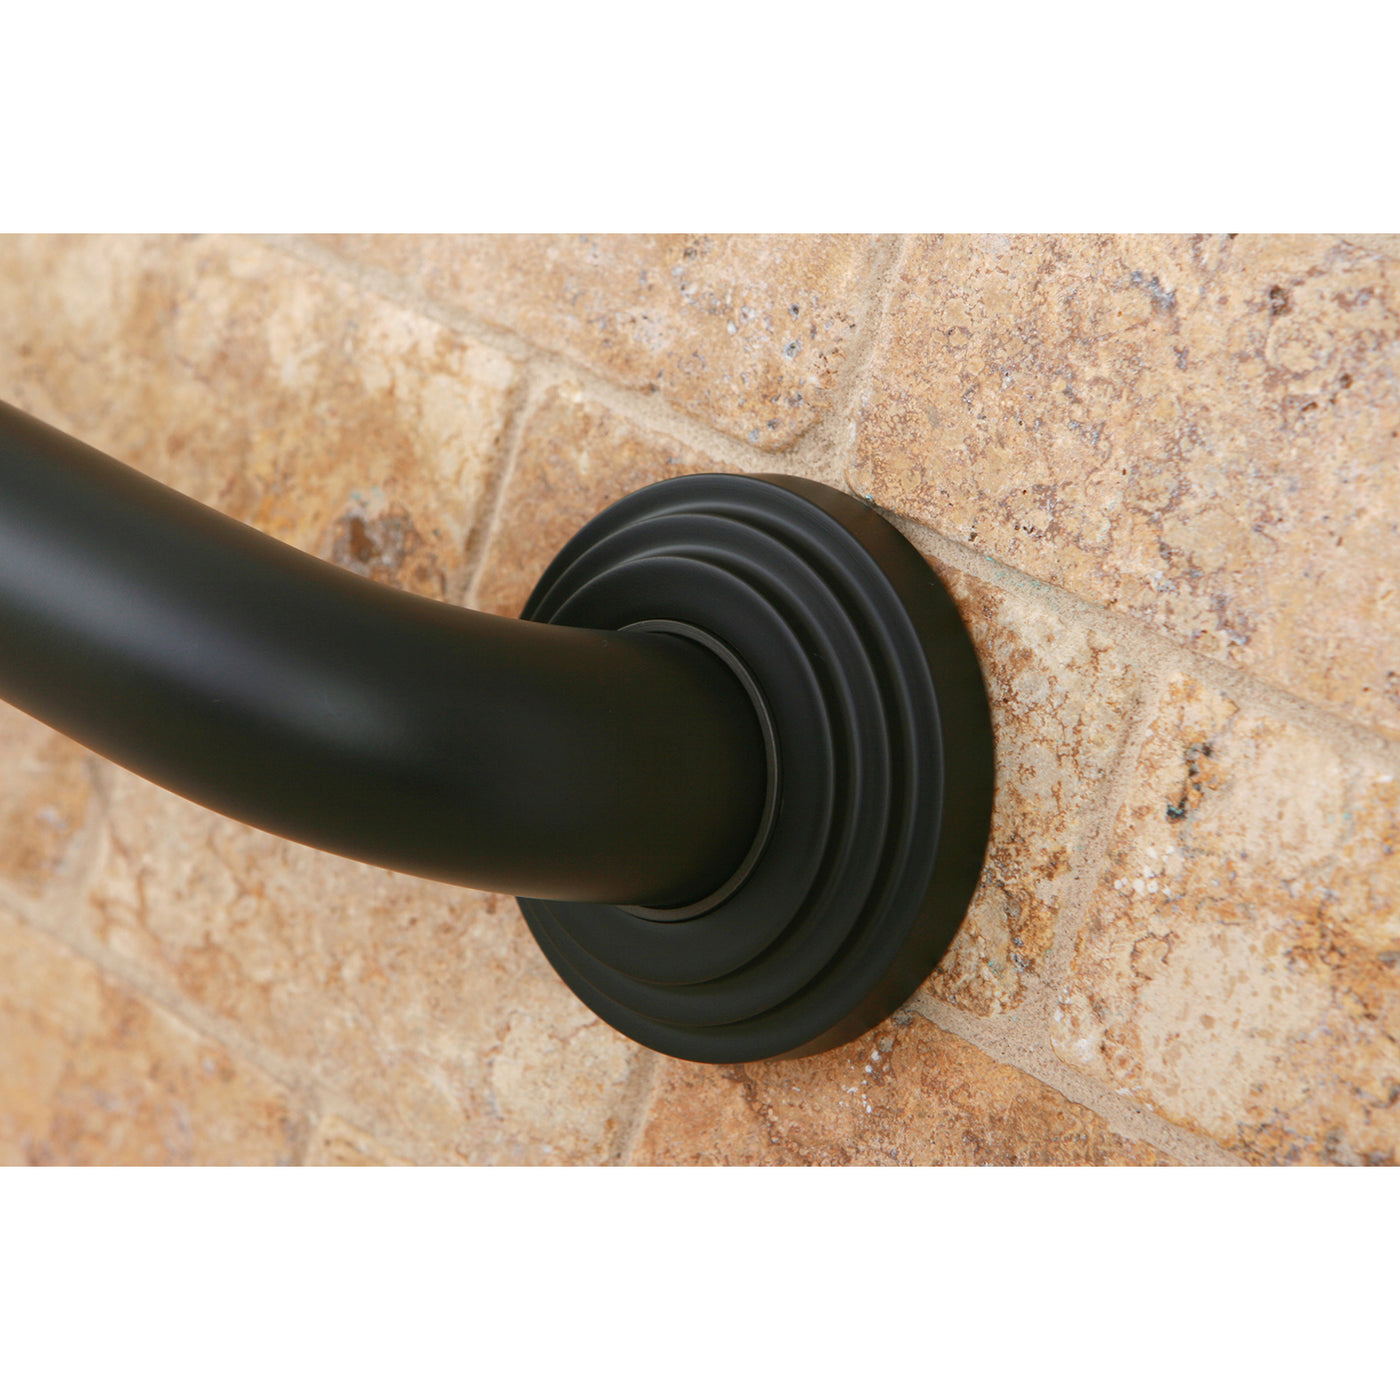 Elements of Design EDR214245 24-Inch X 1-1/4-Inch OD Grab Bar, Oil Rubbed Bronze